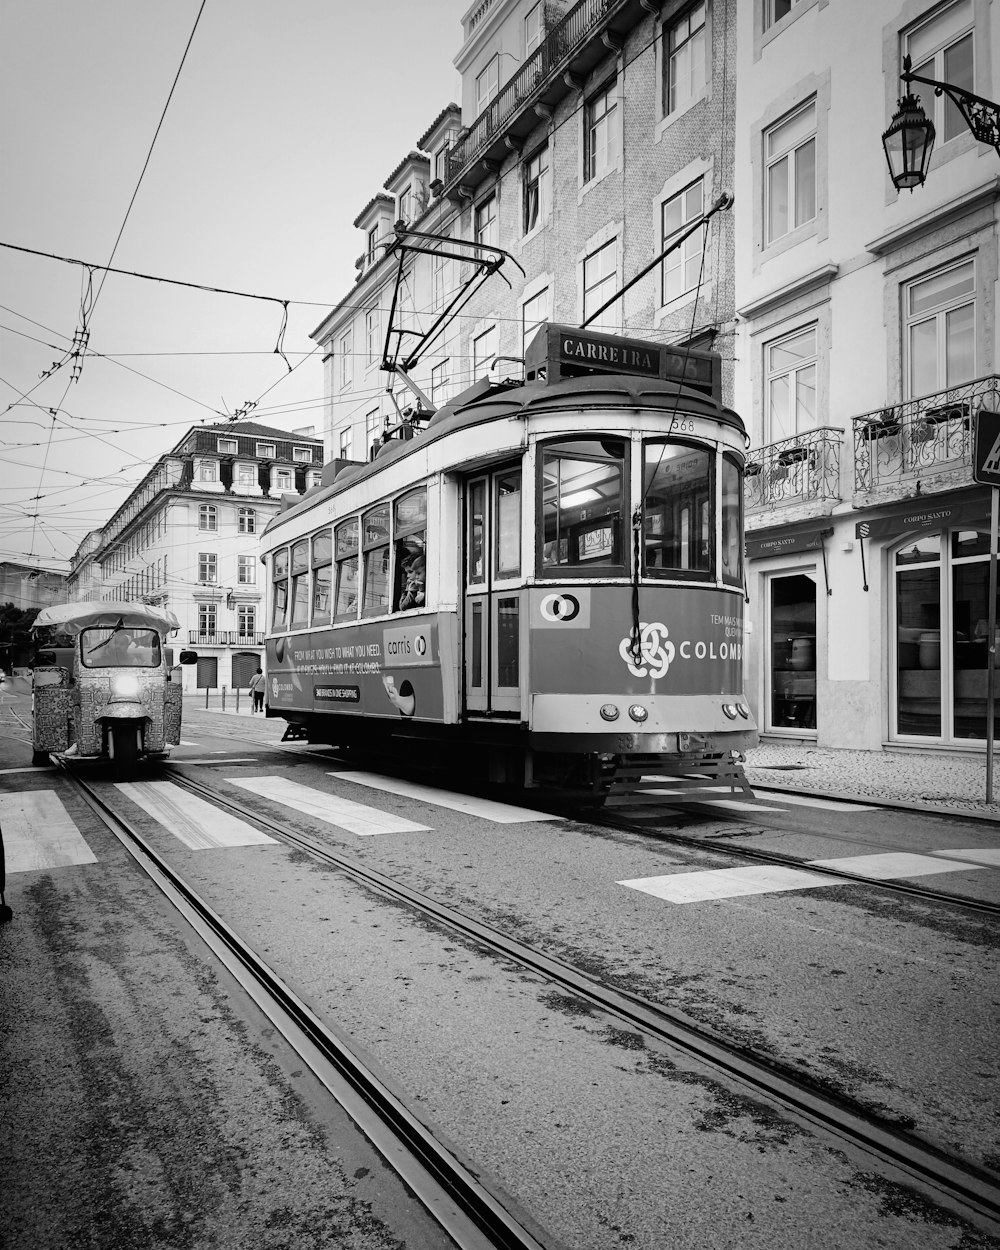 a black and white photo of a trolley on a street